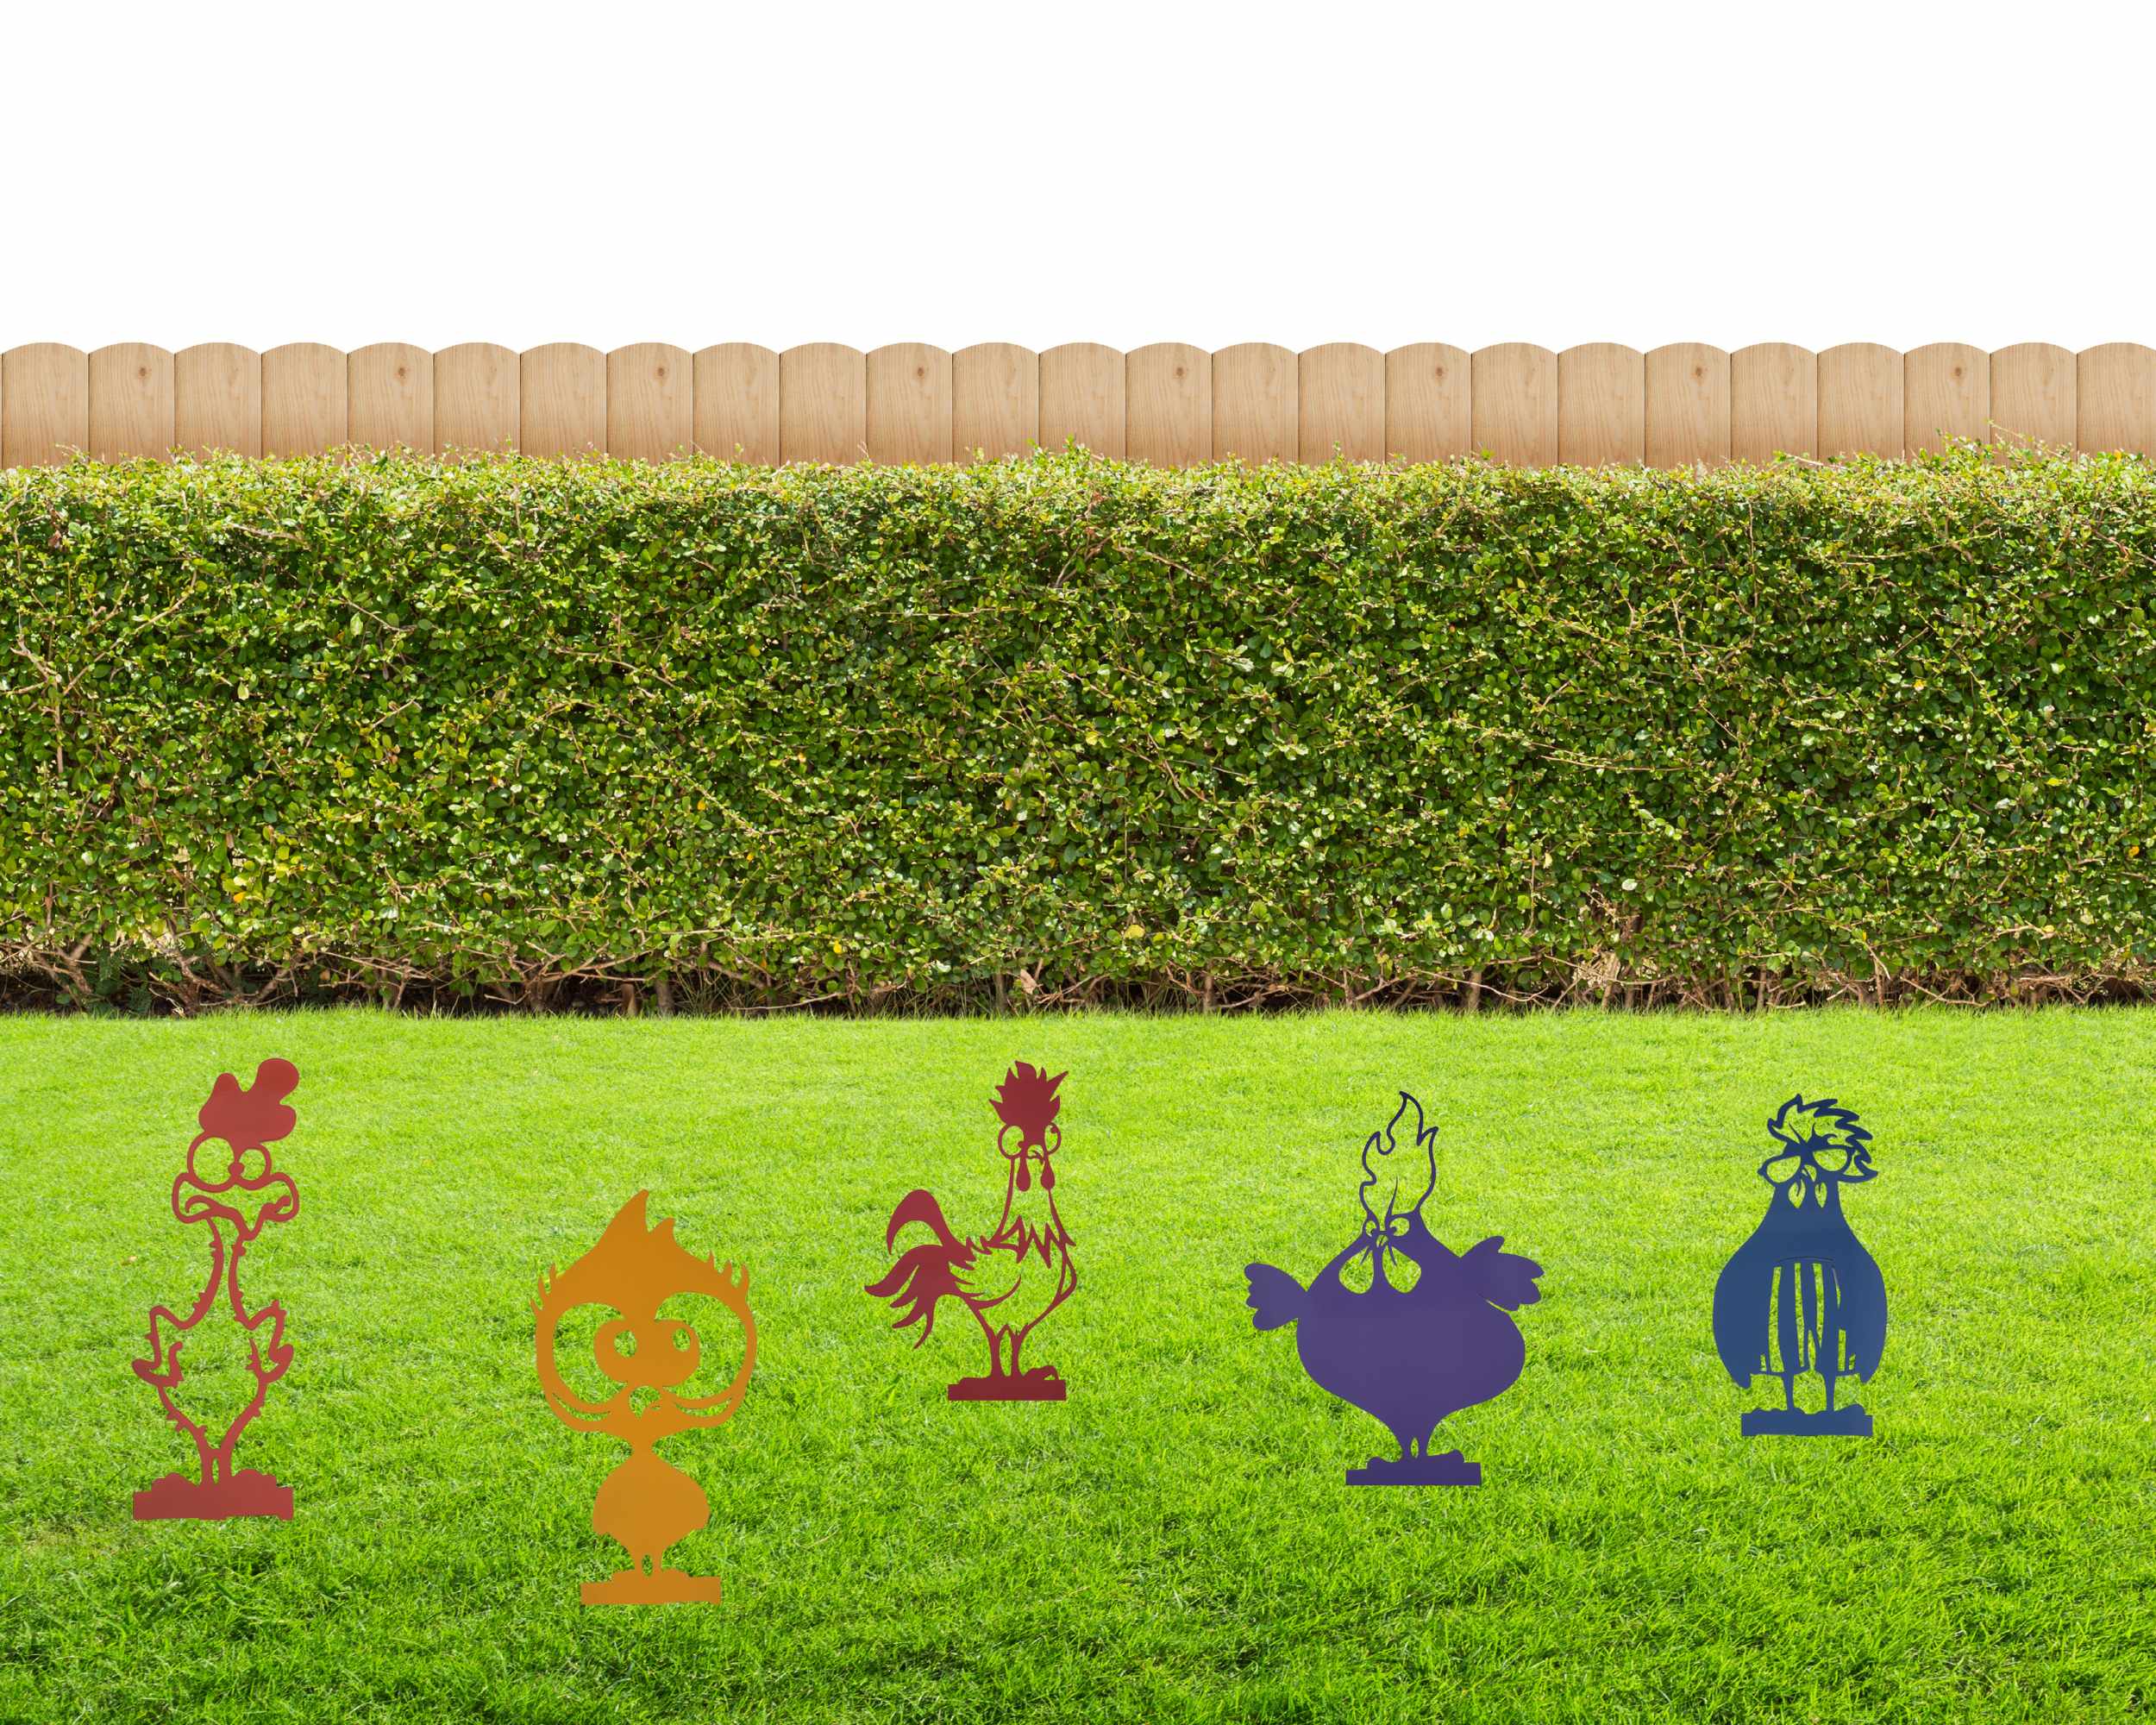 Chickens Yard & Garden Stakes flower beds and yard art - The Metal Peddler Garden Stakes Chicken, chickens, dad garden, funny, garden, ground stake, outdoor life, whimsical